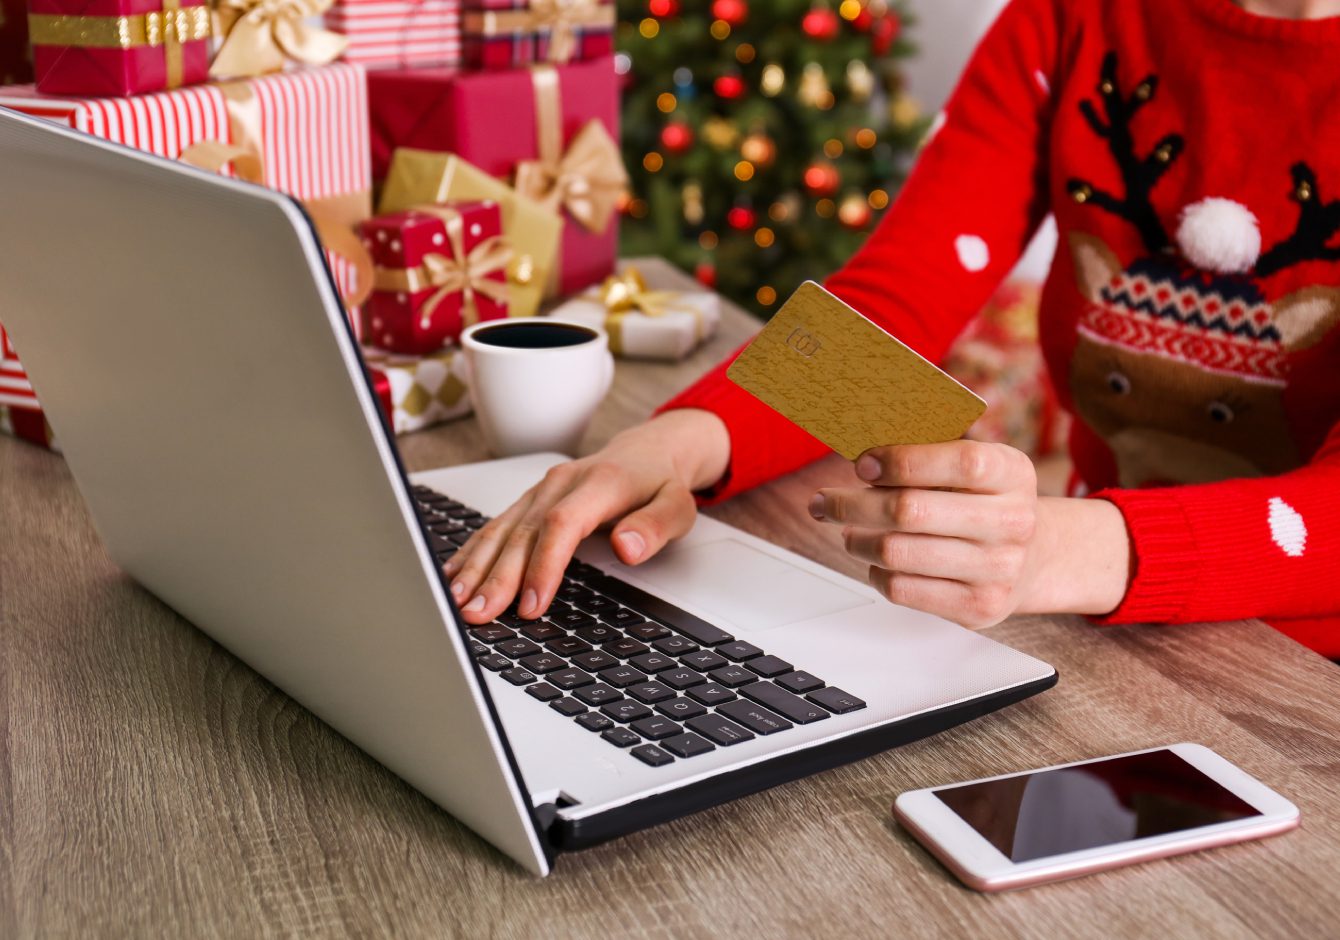 Person using laptop with credit card and Christmas gifts in background